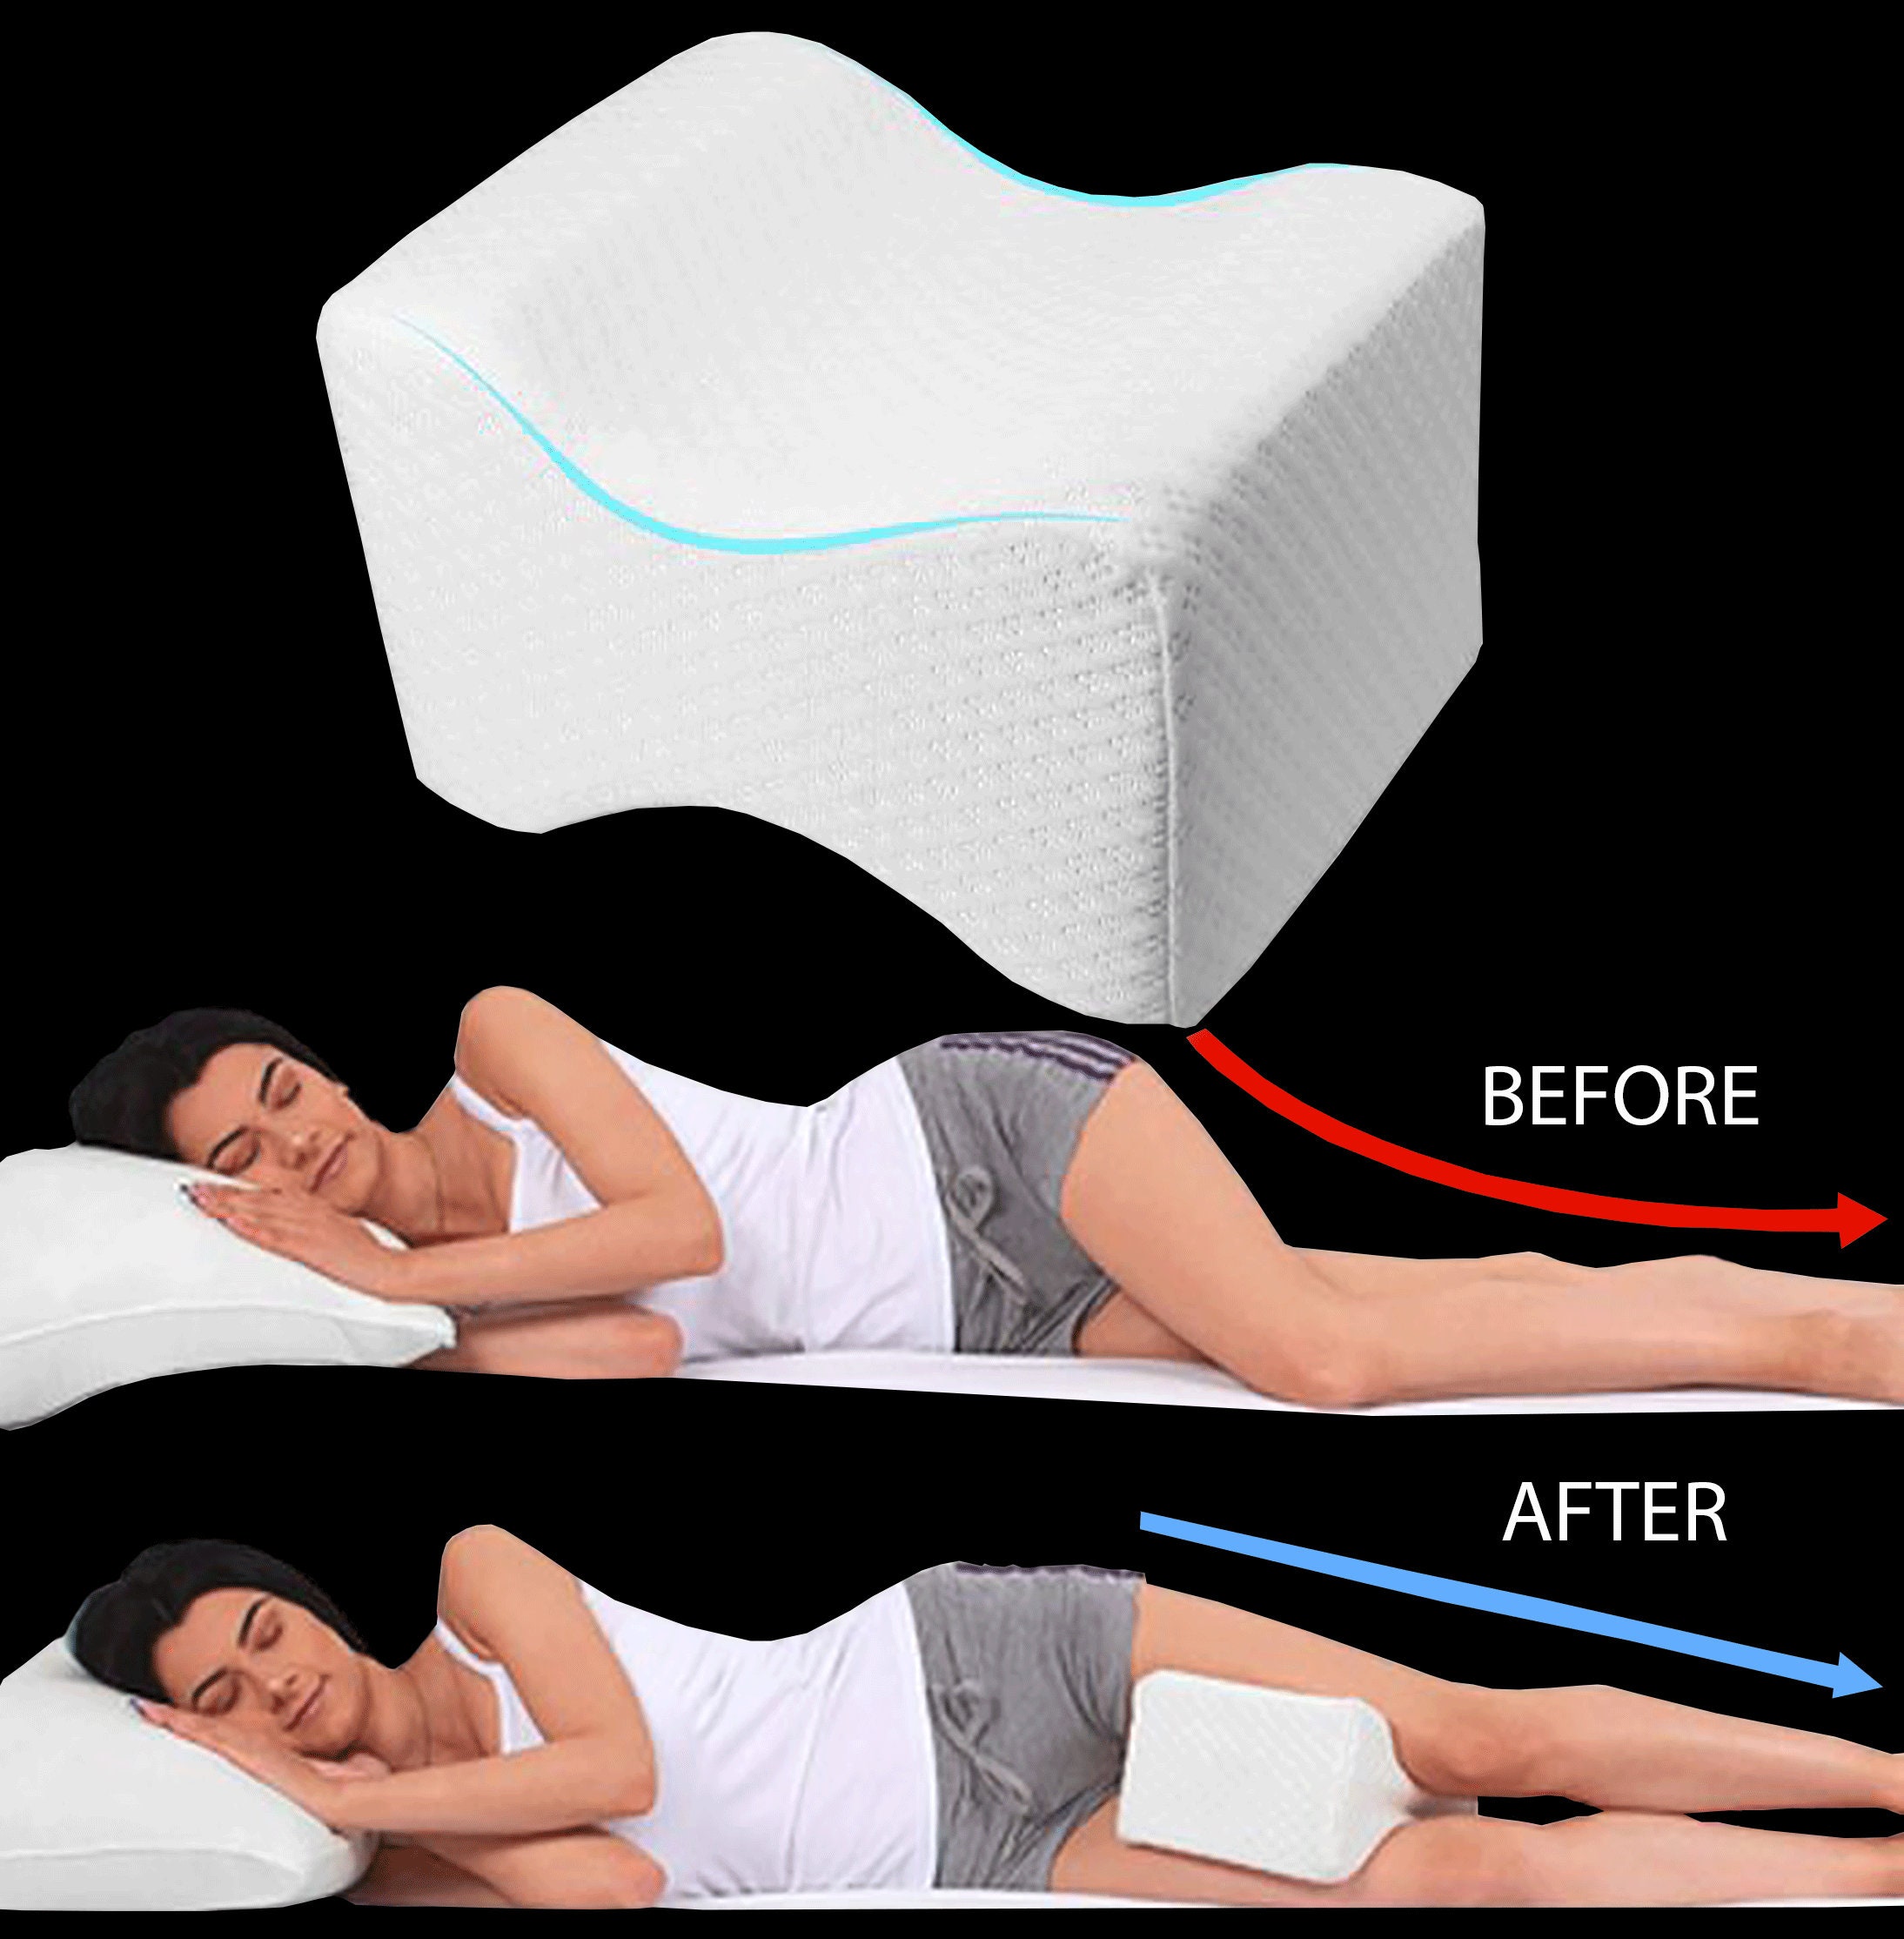 SelectSoma Knee Pillow for Side Sleepers - Cooling Memory Foam Leg Pillow for Sleeping - Leg & Knee Foam Support Pillow - Soothing Pain Relief for